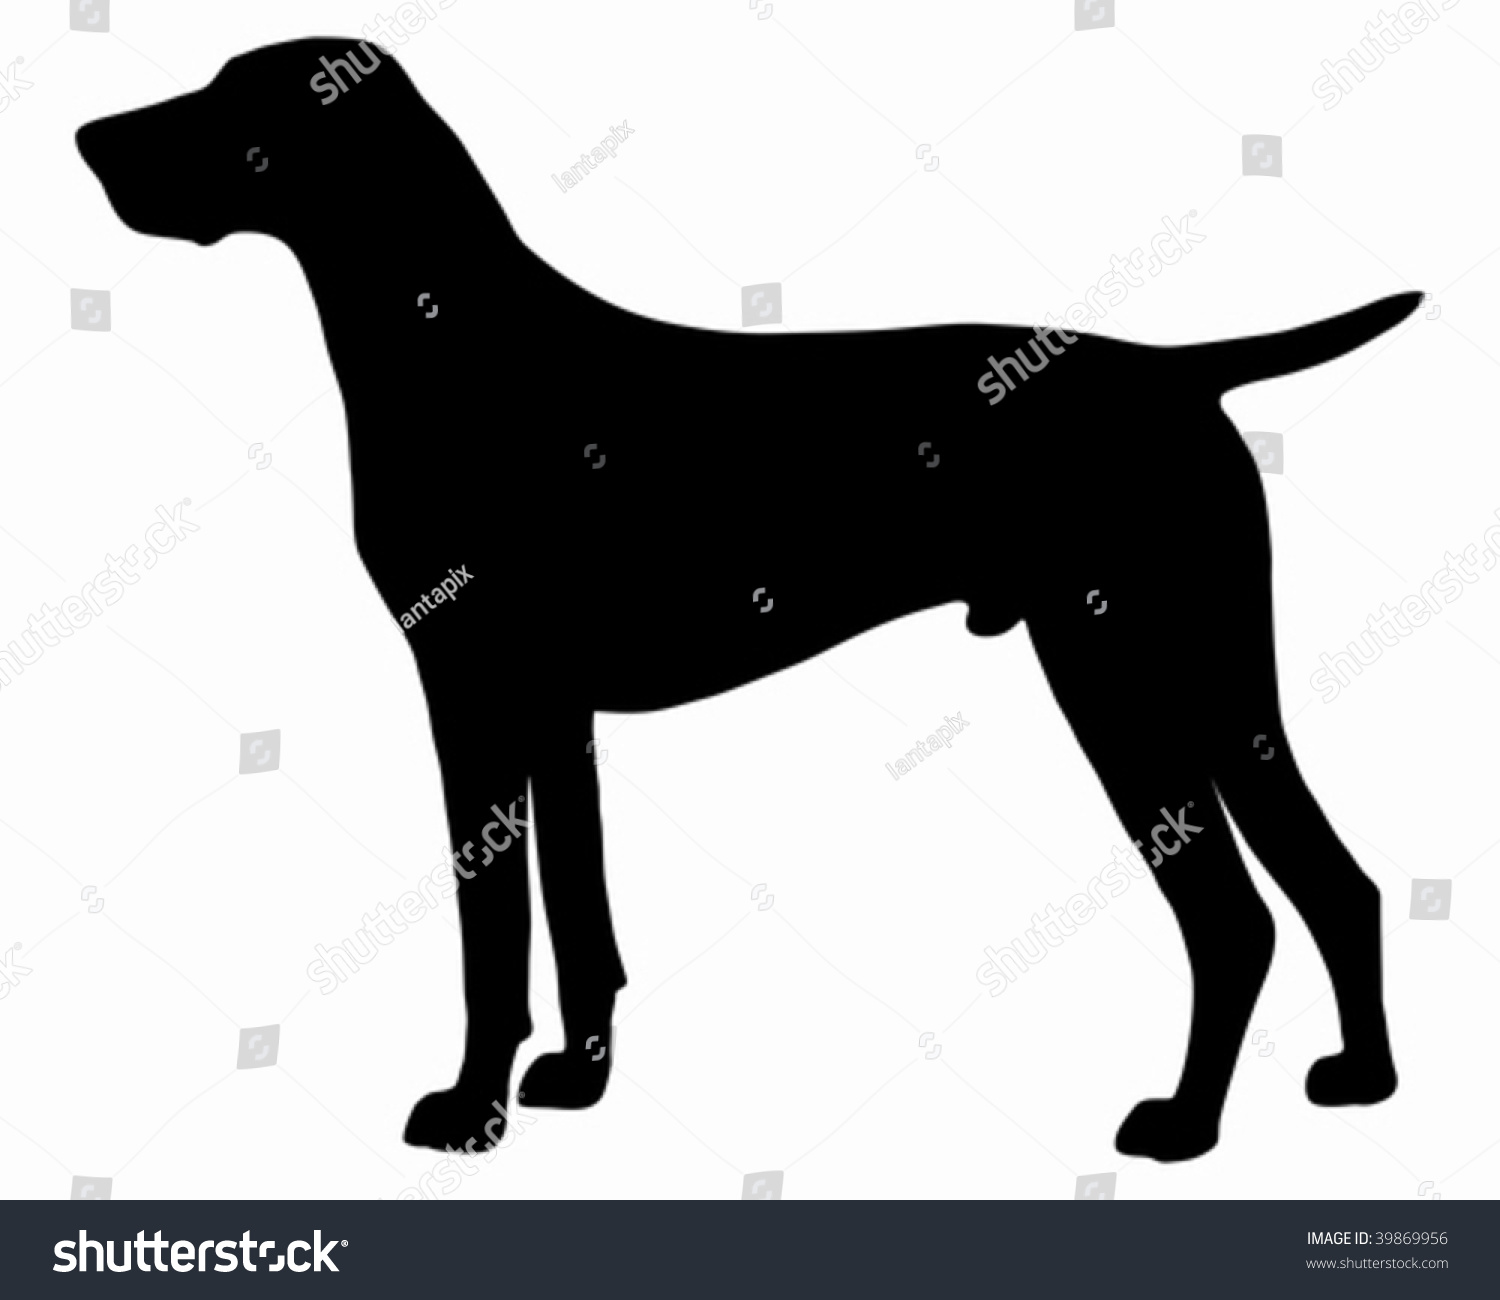 Black Silhouette German Shorthaired Pointer Stock Vector Royalty Free 39869956